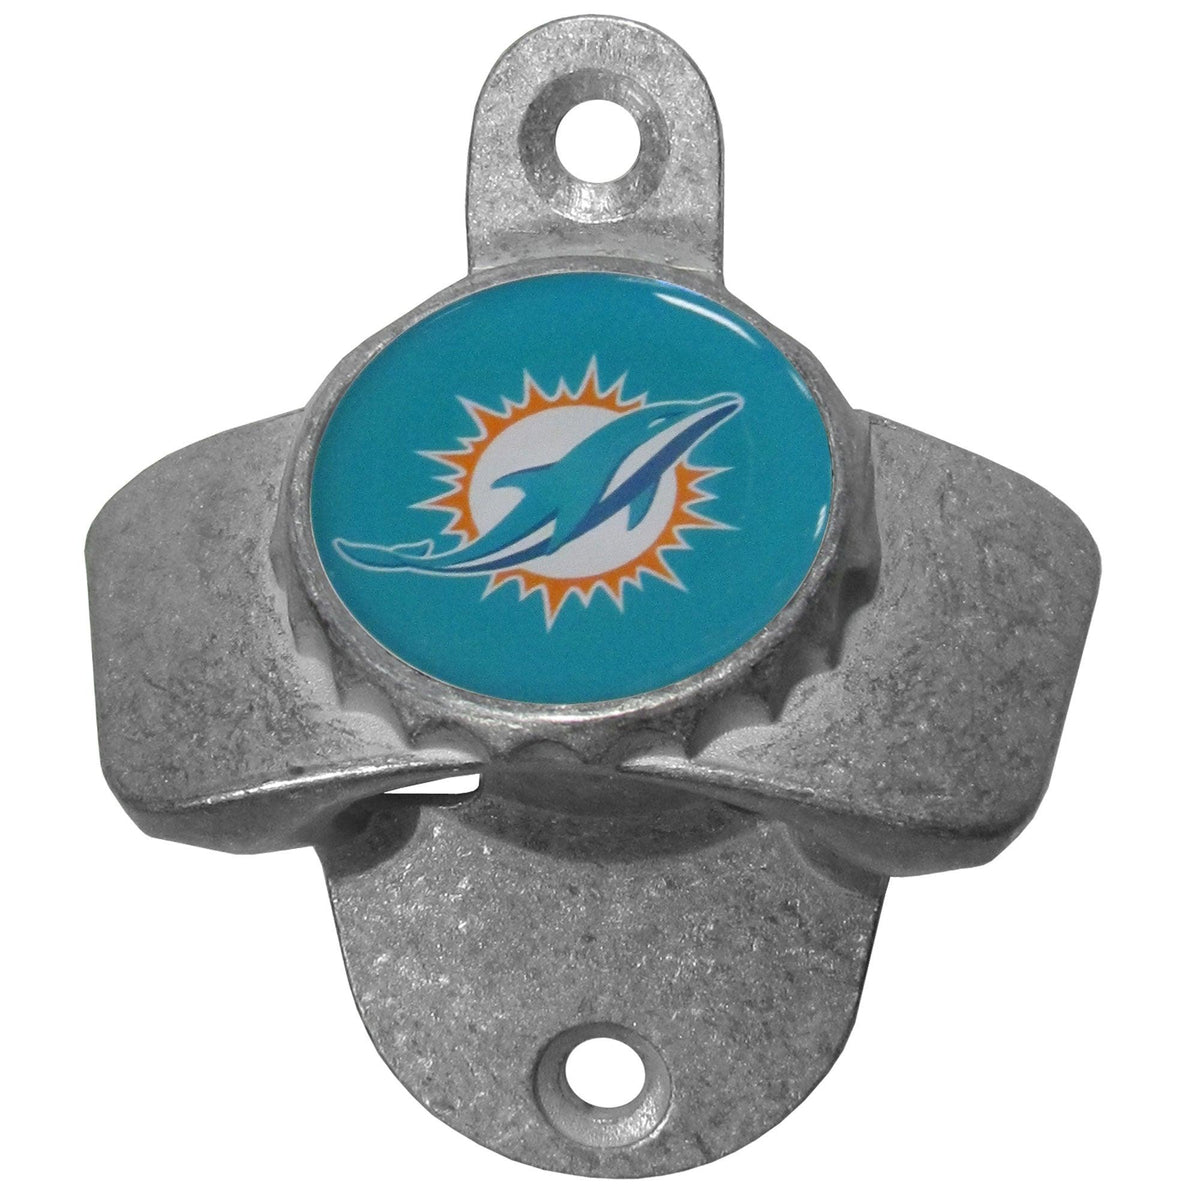 Miami Dolphins Wall Mounted Bottle Opener - Flyclothing LLC